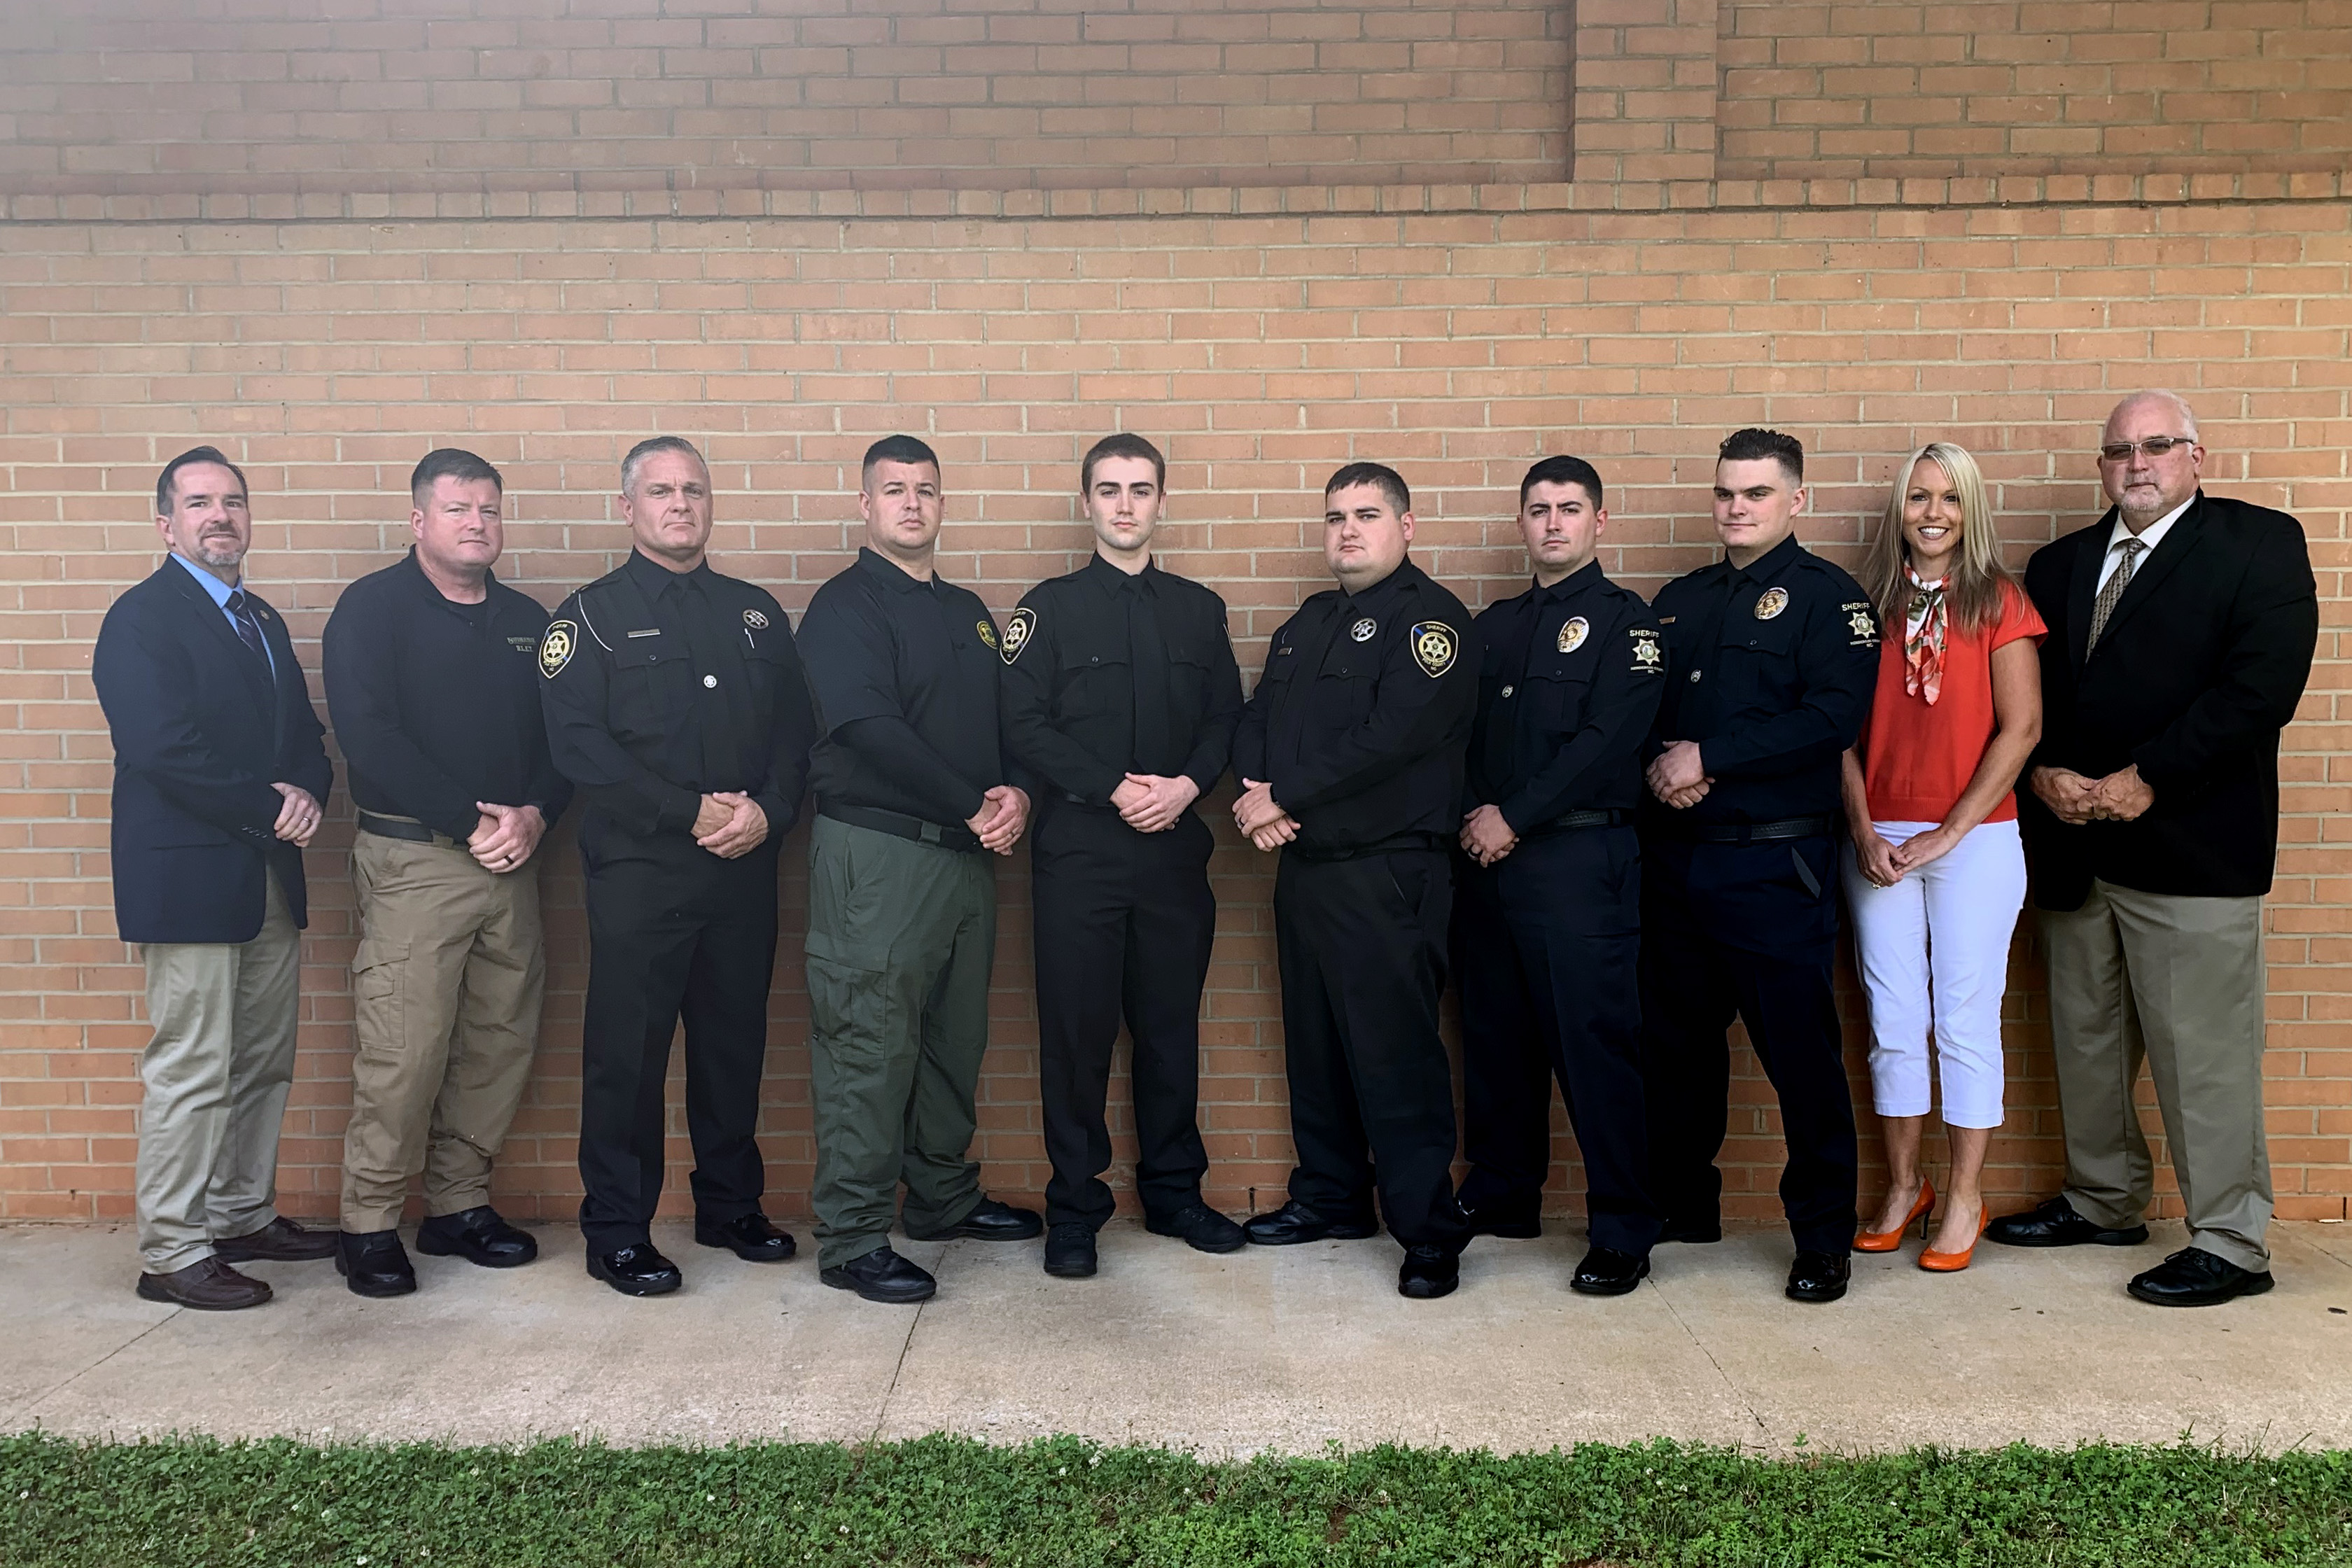 Seven students graduated from Basic Law Enforcement Training at Isothermal Community College this week. Pictured are instructor Chris Francis (left to right), Joey Sisk, Shane Jackson, Zachery Camby, Noah Jackson, Dilon Byrd, Steve Starling, Tye Galloway, Ava Yamouti, dean of Health and Public Services, and program director Philip Bailey. 